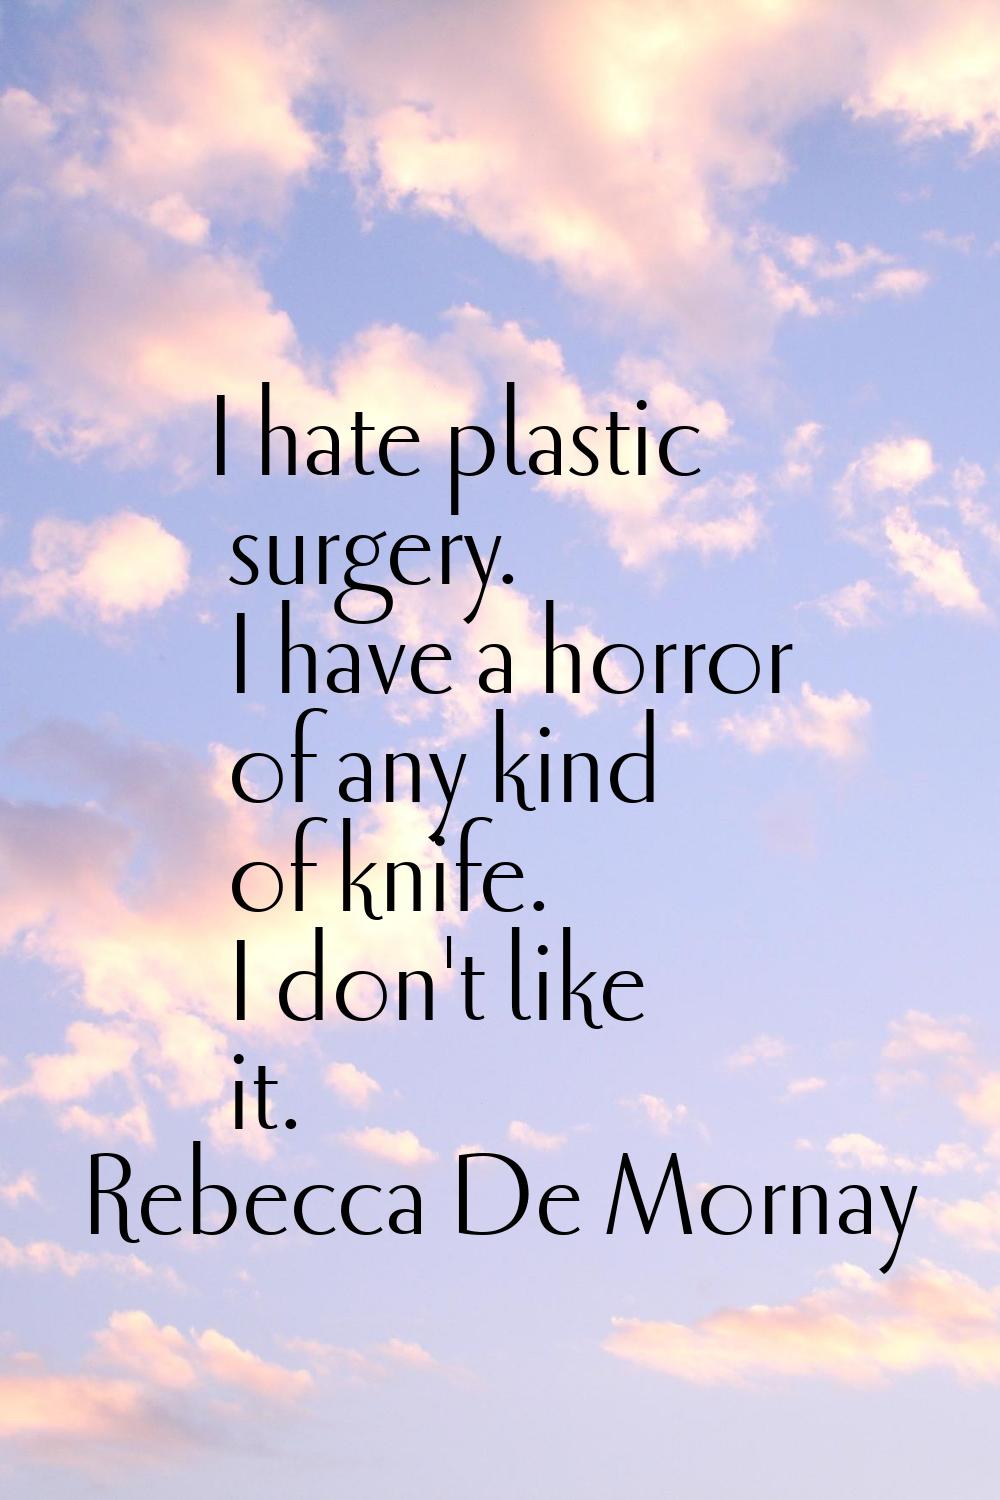 I hate plastic surgery. I have a horror of any kind of knife. I don't like it.